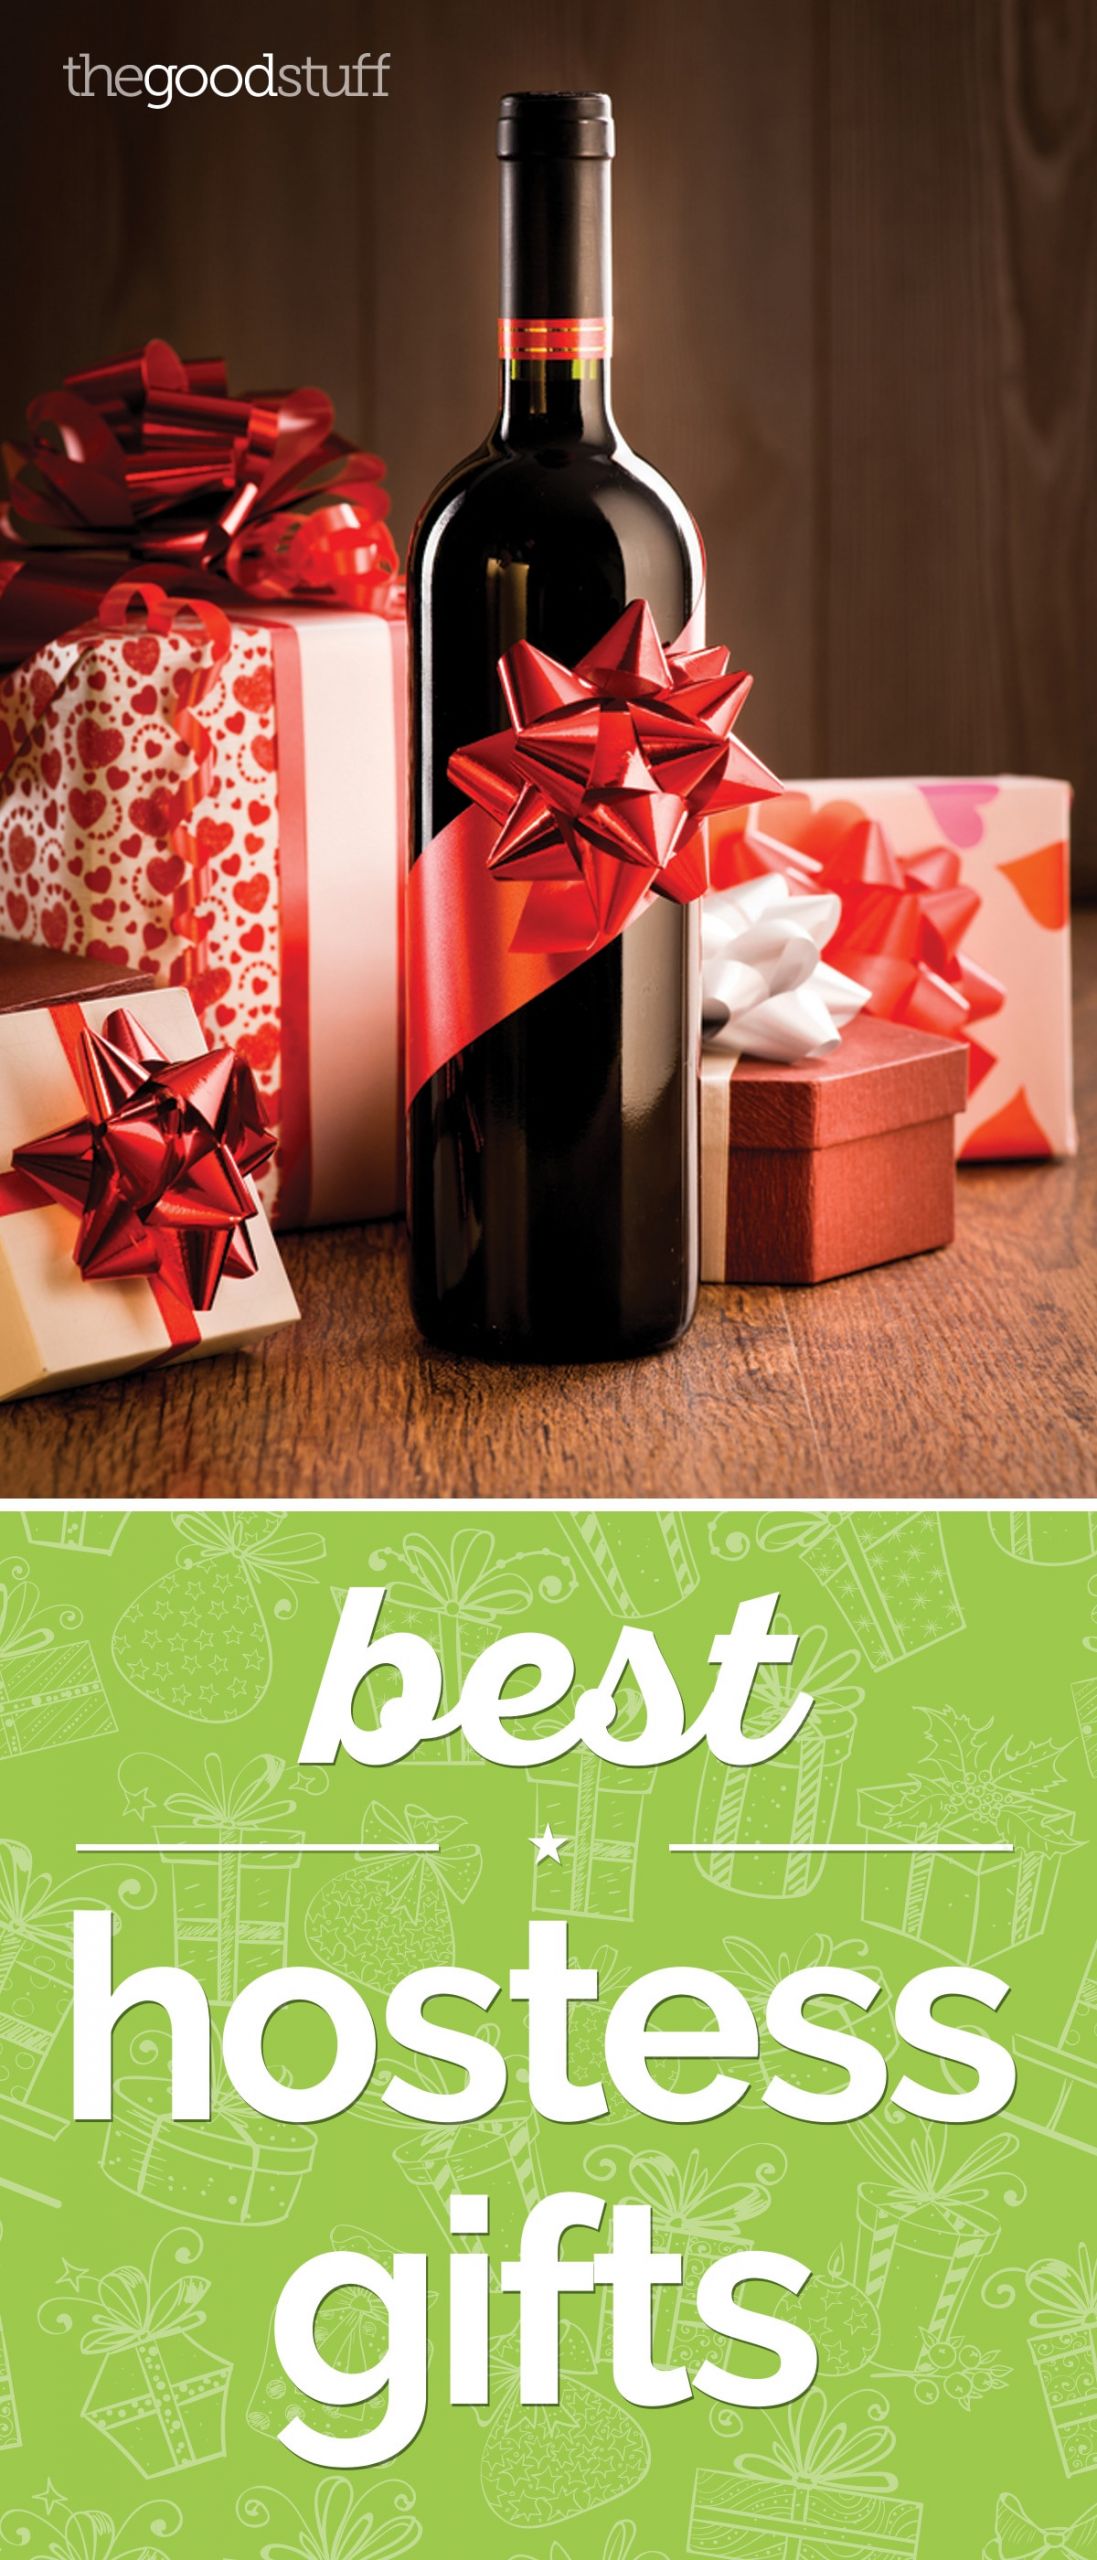 Holiday Party Gift Ideas For The Hostess
 Make Sure You re Invited Back Next Year Best Hostess